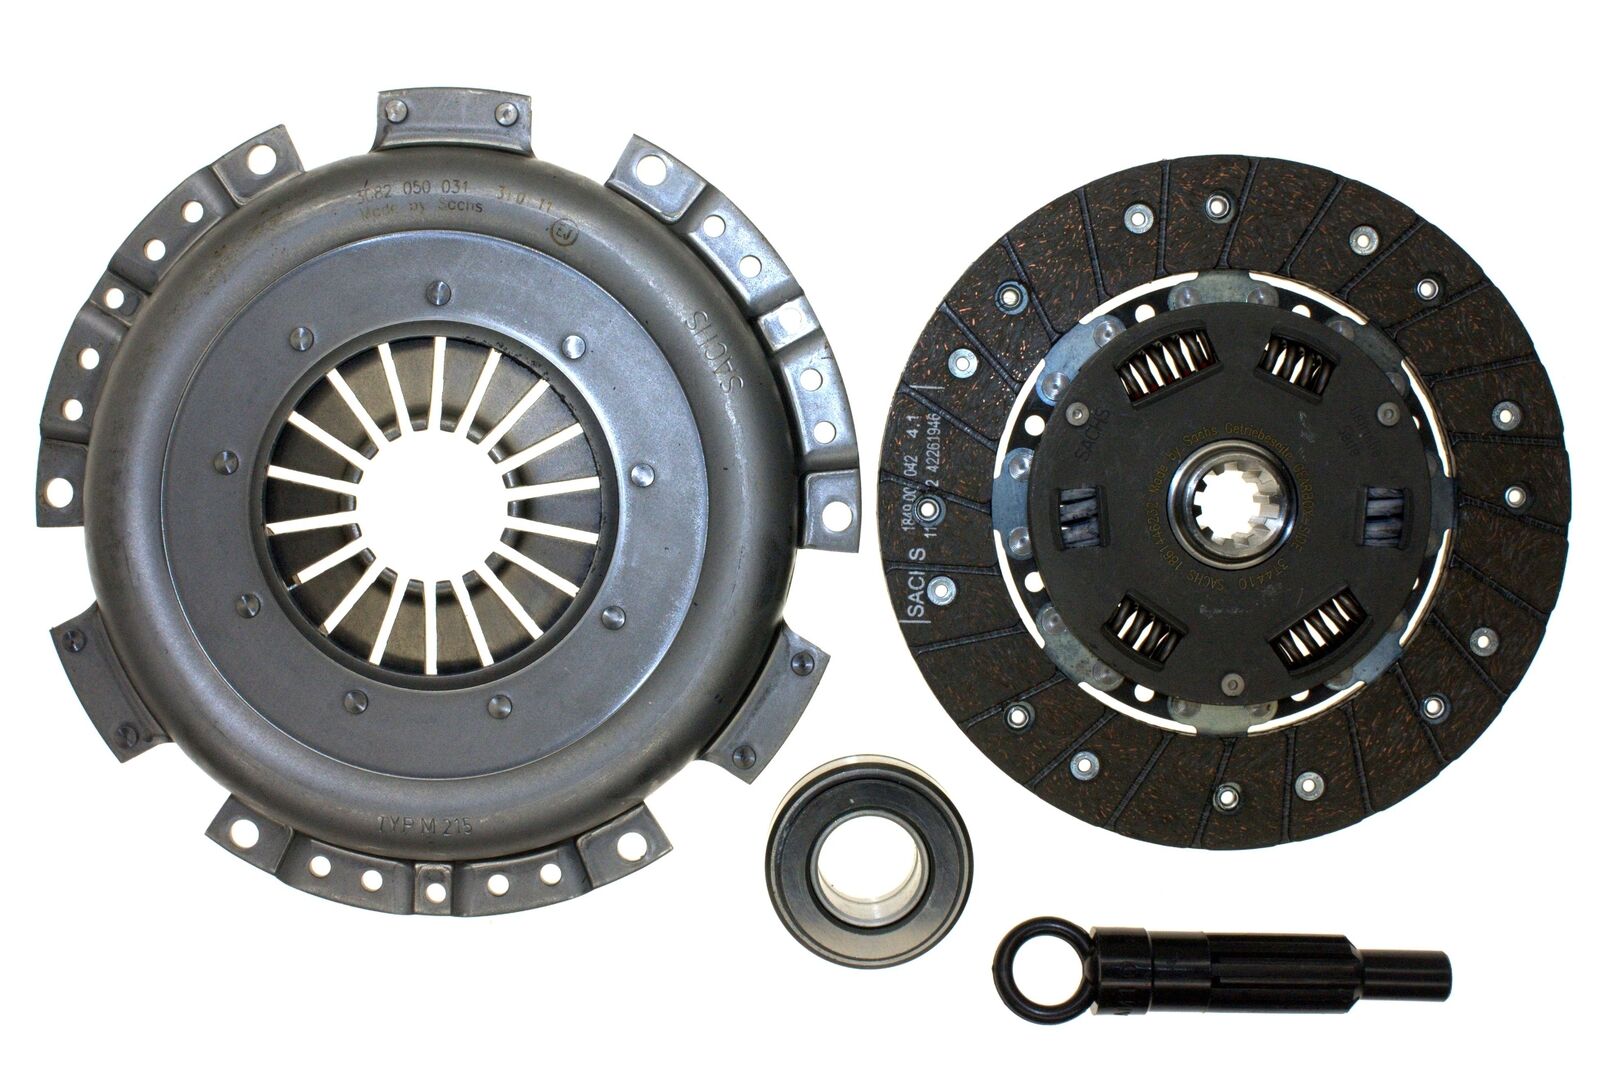  Clutch Kit for Alfa Romeo Spider 1969 - 1994 & Others SACHSKF026-01